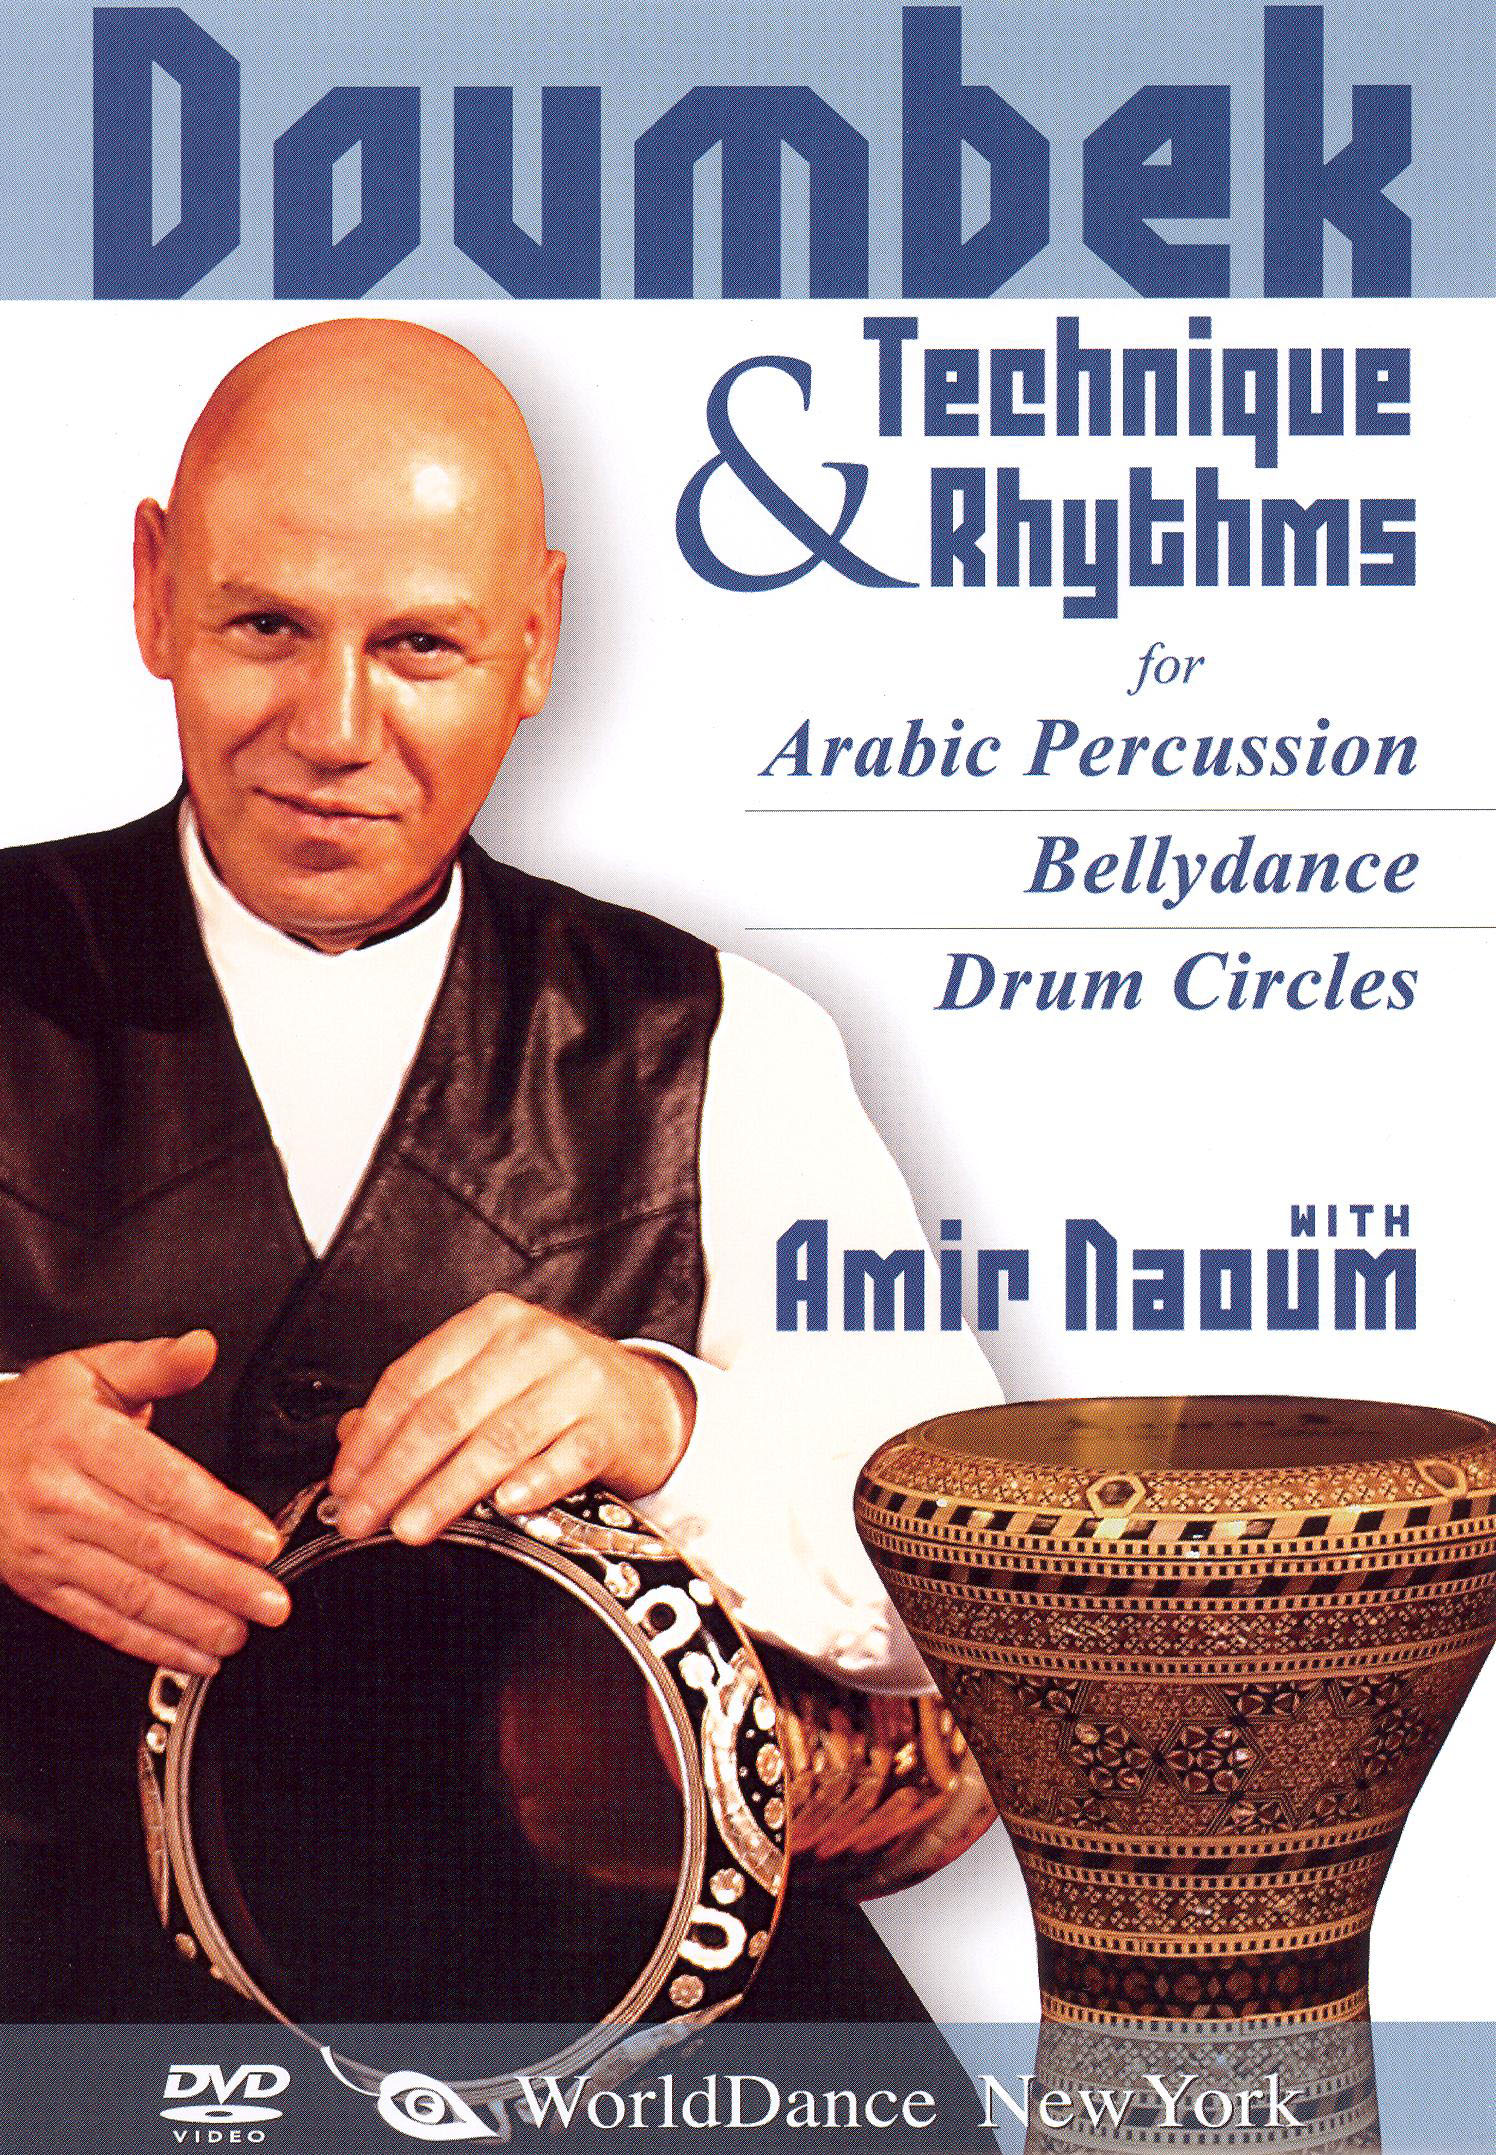 Doumbek Technique and Rhythms for Arabic Percussion, Bellydance and Drum Circles [DVD]